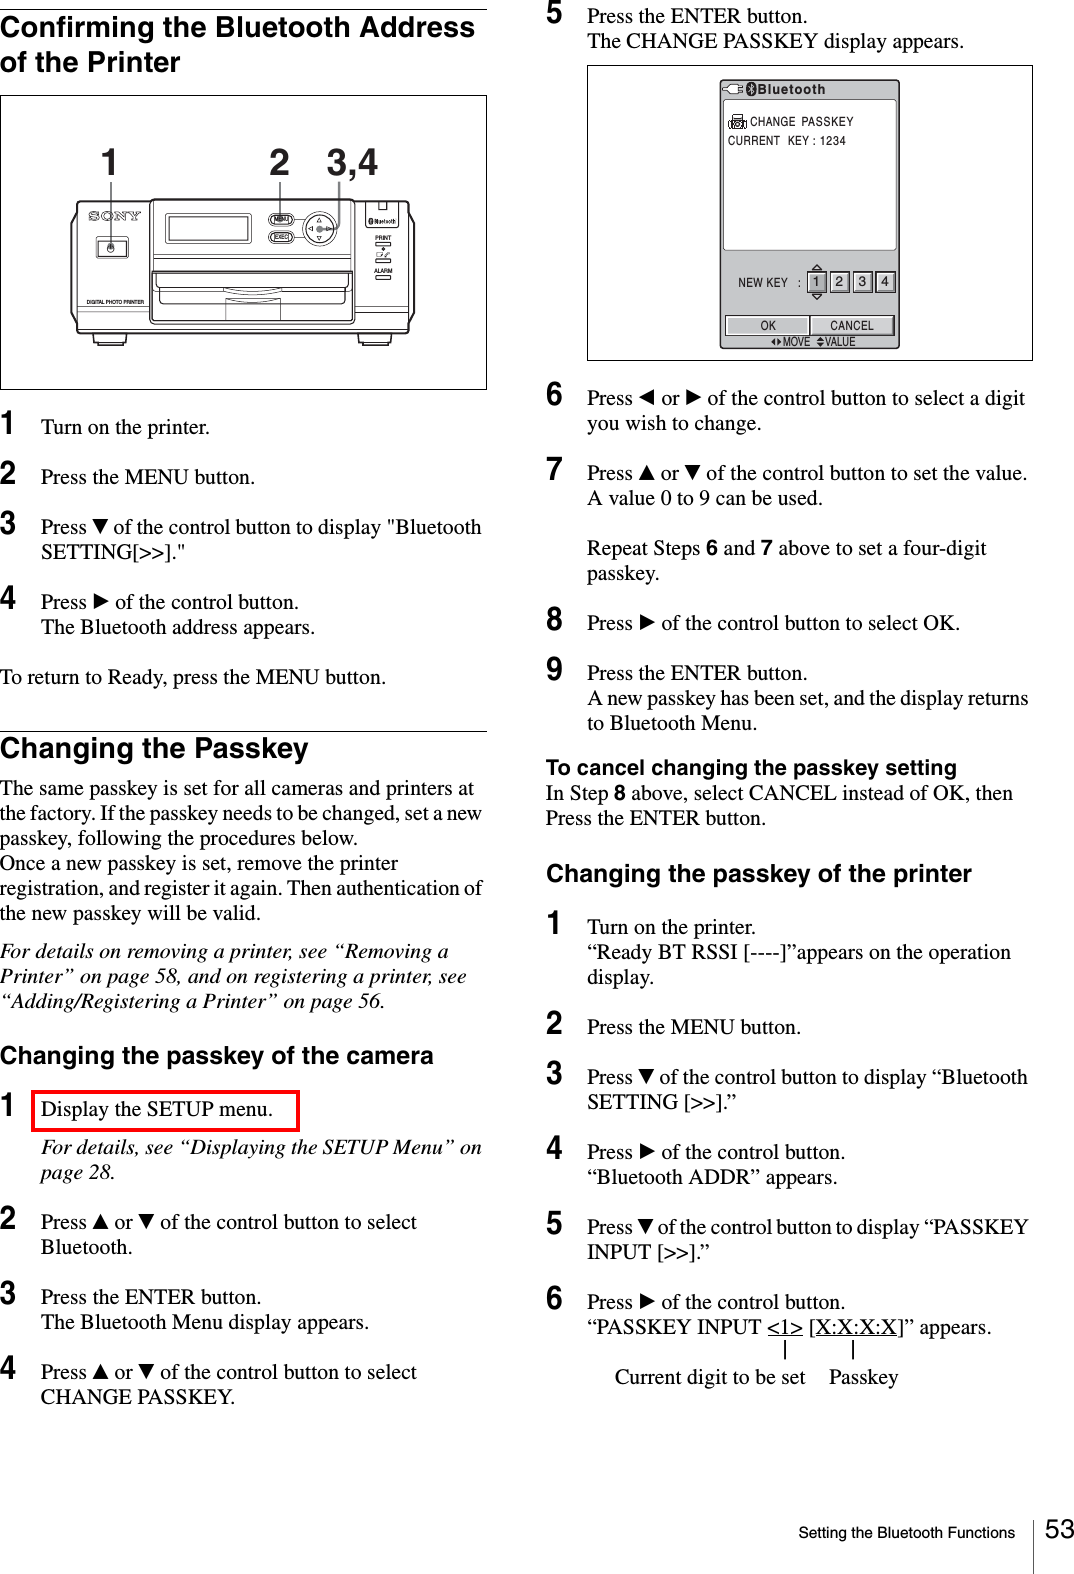 Setting the Bluetooth Functions 53Confirming the Bluetooth Address of the Printer1Turn on the printer.2Press the MENU button.3Press V of the control button to display &quot;Bluetooth SETTING[&gt;&gt;].&quot;4Press B of the control button.The Bluetooth address appears.To return to Ready, press the MENU button.Changing the PasskeyThe same passkey is set for all cameras and printers at the factory. If the passkey needs to be changed, set a new passkey, following the procedures below.Once a new passkey is set, remove the printer registration, and register it again. Then authentication of the new passkey will be valid.For details on removing a printer, see “Removing a Printer” on page 58, and on registering a printer, see “Adding/Registering a Printer” on page 56.Changing the passkey of the camera1Display the SETUP menu.For details, see “Displaying the SETUP Menu” on page 28.2Press v or V of the control button to select Bluetooth.3Press the ENTER button.The Bluetooth Menu display appears.4Press v or V of the control button to select CHANGE PASSKEY.5Press the ENTER button.The CHANGE PASSKEY display appears.6Press b or B of the control button to select a digit you wish to change.7Press v or V of the control button to set the value.A value 0 to 9 can be used.Repeat Steps 6 and 7 above to set a four-digit passkey.8Press B of the control button to select OK.9Press the ENTER button.A new passkey has been set, and the display returns to Bluetooth Menu.To cancel changing the passkey settingIn Step 8 above, select CANCEL instead of OK, then Press the ENTER button.Changing the passkey of the printer1Turn on the printer.“Ready BT RSSI [----]”appears on the operation display.2Press the MENU button.3Press V of the control button to display “Bluetooth SETTING [&gt;&gt;].”4Press B of the control button.“Bluetooth ADDR” appears.5Press V of the control button to display “PASSKEY INPUT [&gt;&gt;].”6Press B of the control button.“PASSKEY INPUT &lt;1&gt; [X:X:X:X]” appears.||  Current digit to be set PasskeyALARMPRINTMENUEXECDIGITAL PHOTO PRINTER11 2 3,4BluetoothCURRENT  KEY : 1234NEW KEY   :OKMOVE VALUECHANGE  PASSKEYCANCEL1234